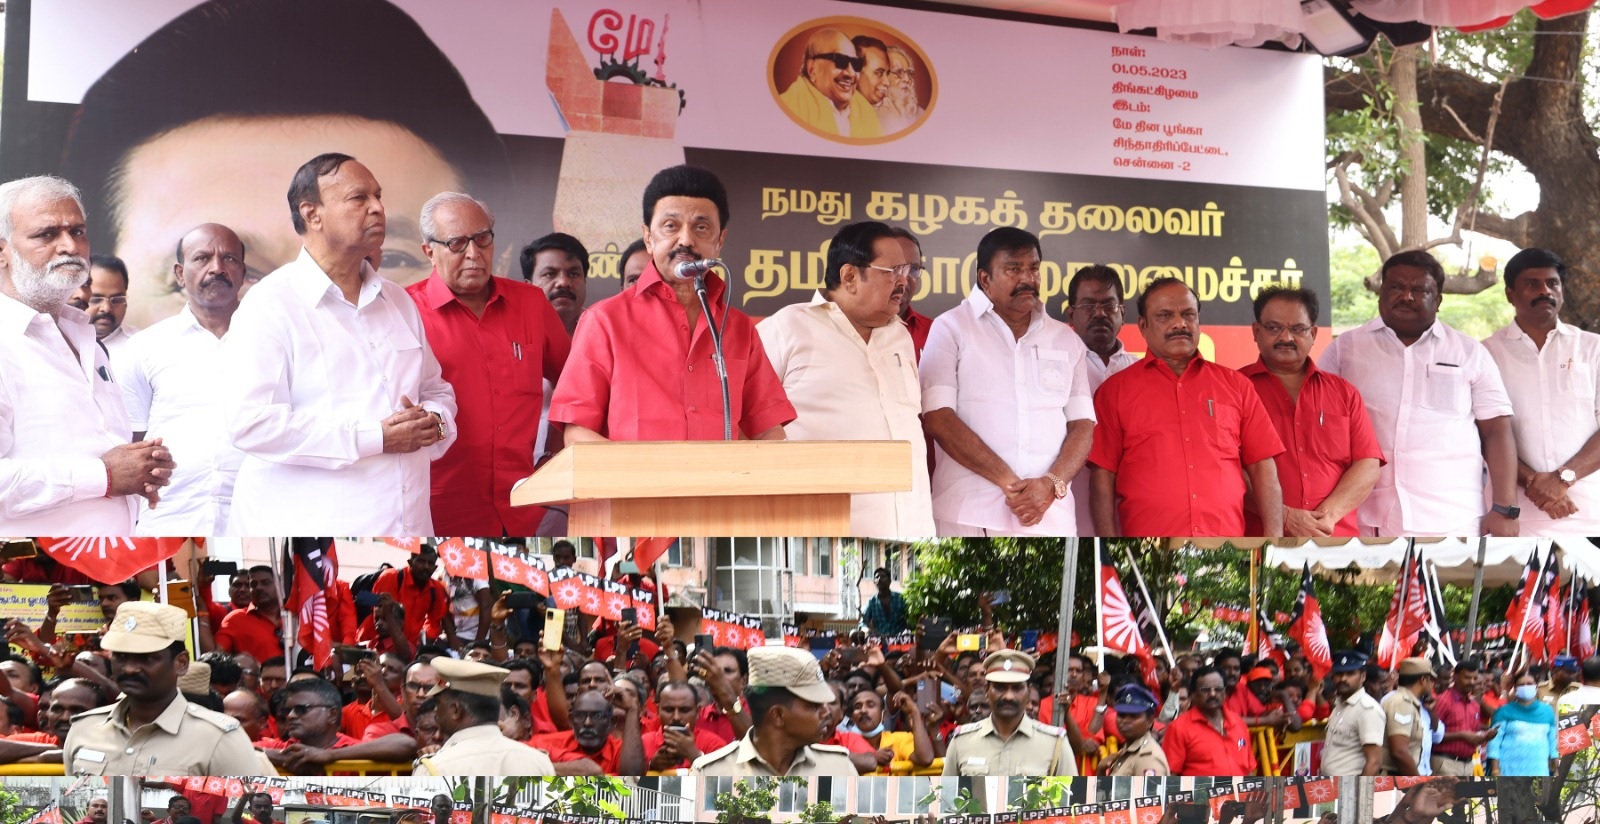 Chief Minister Stalin addressing the May Day function in Chennai on Monday. (Supplied)